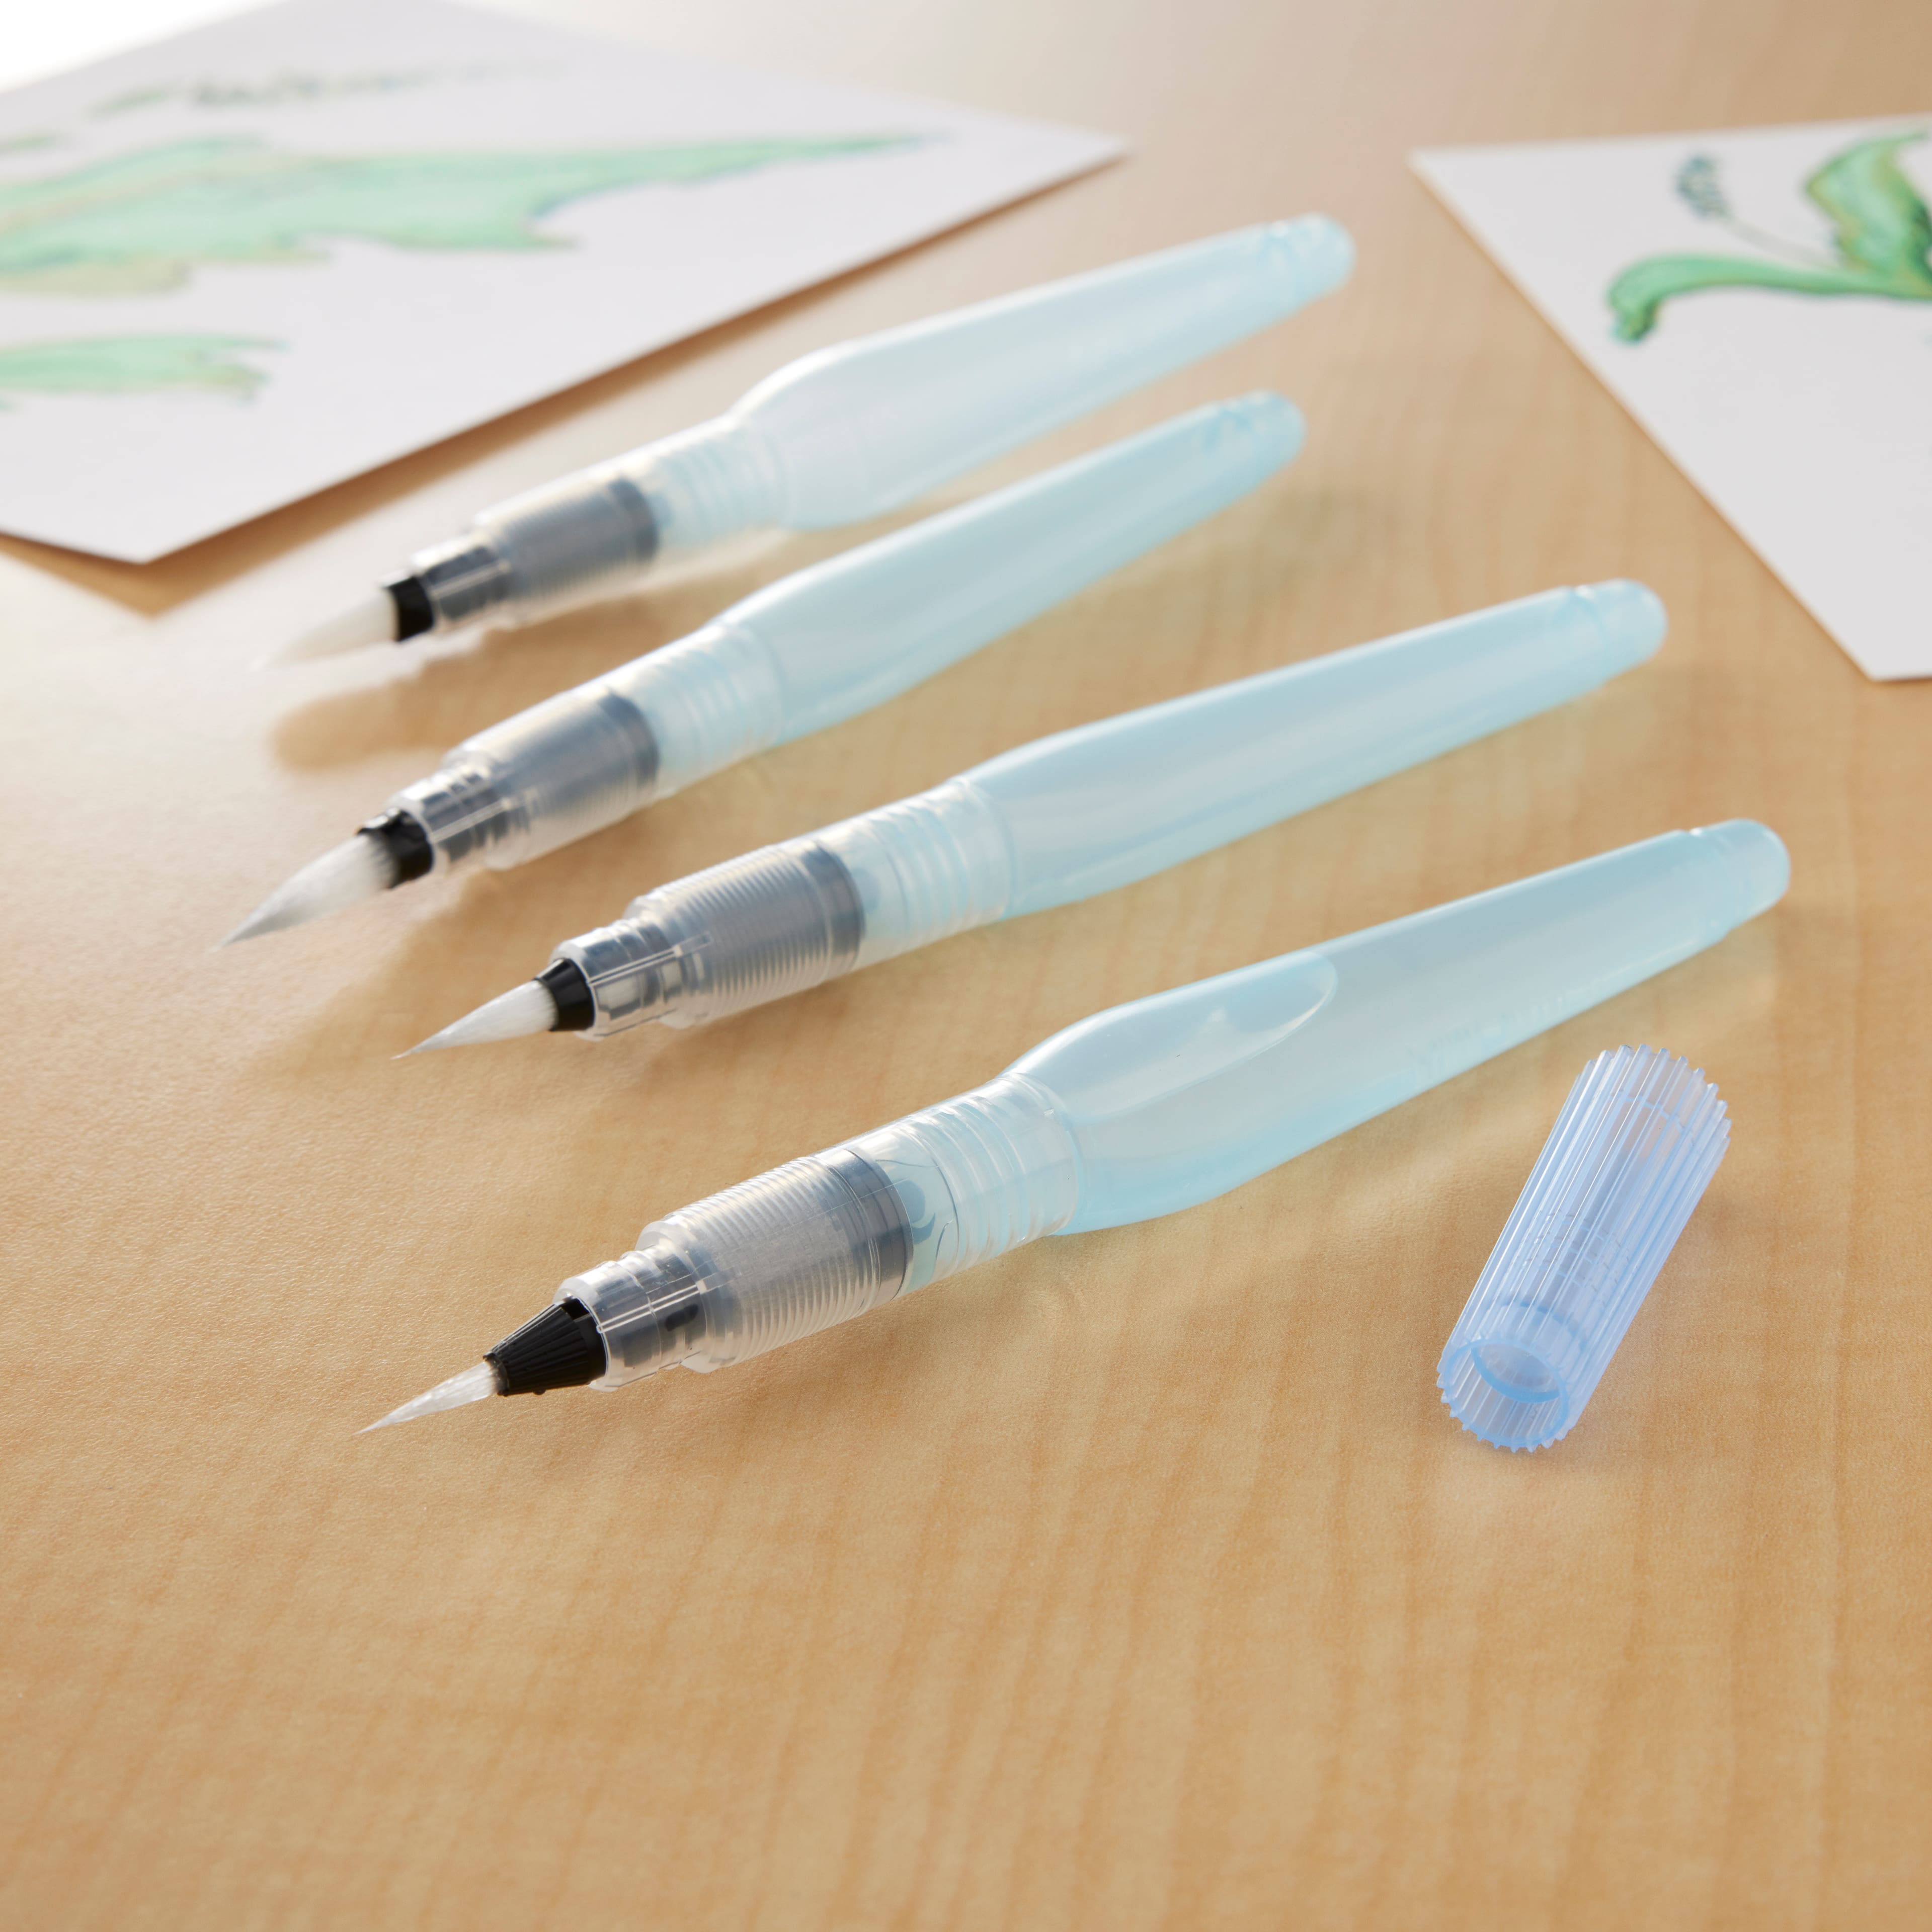 How to Use the Pentel Aquash Water Brush Pens for Watercolor